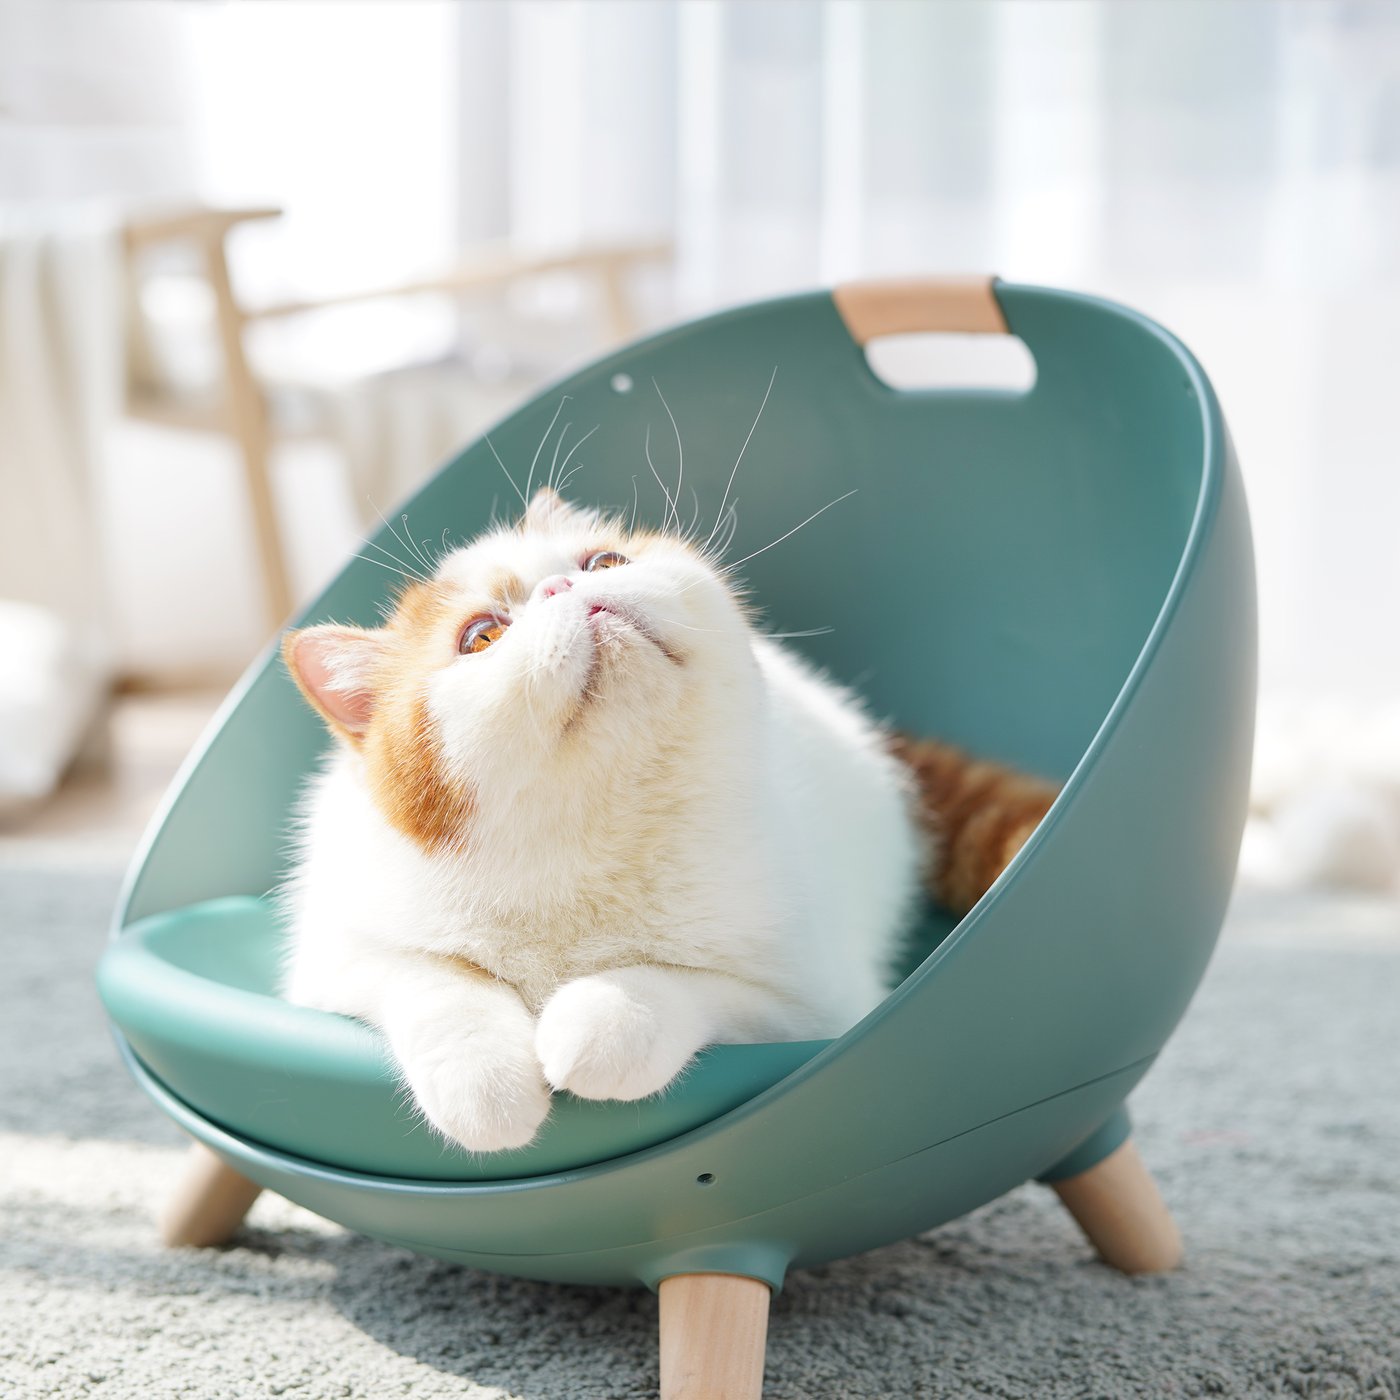 Cats will swing into a comfy snooze with this cat lounger. Comfortable, versatile, and beautifully designed to offer your cat a distinctive napping experience. This lounger can become your cat’s favorite resting spot. It can be used as a swing to help soothe your cat’s stress or as an open chair for a purr-fect afternoon nap. The seat of the lounger is made with a temperature regulation solution that can provide a warmer or cooler sleep based on the season.